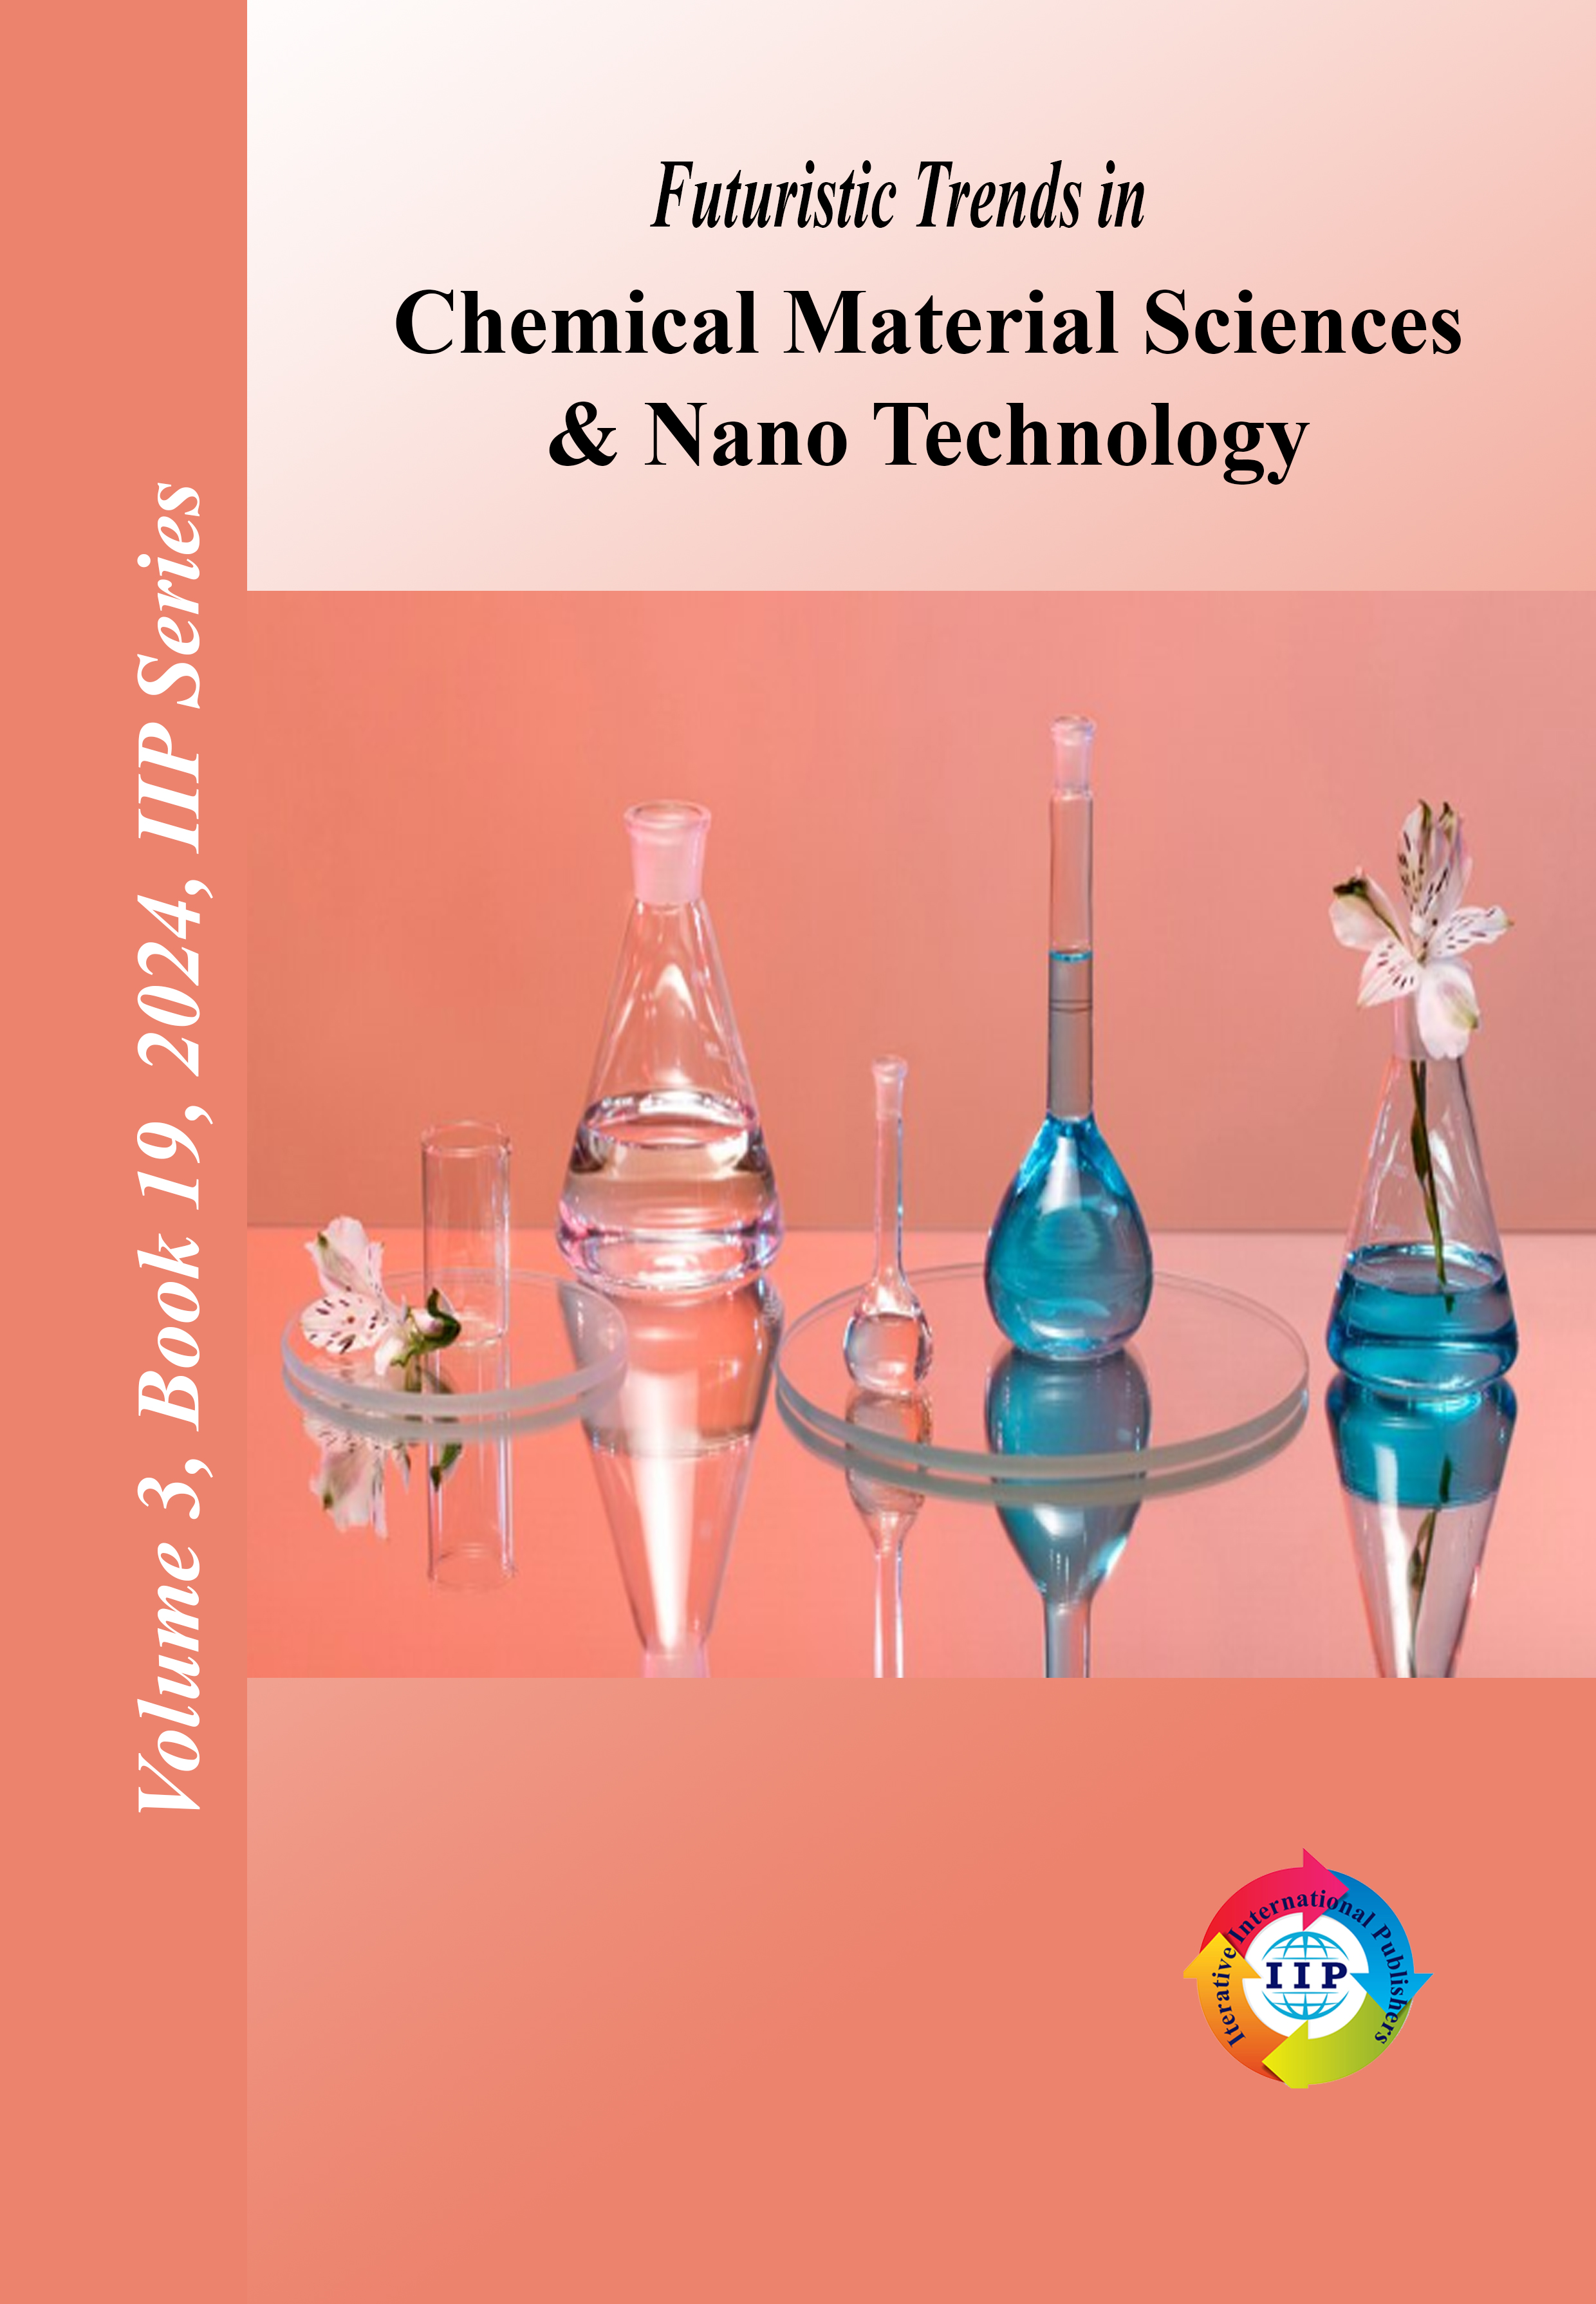 Futuristic Trends in Chemical Material Sciences & Nano Technology Volume 3 Book 19